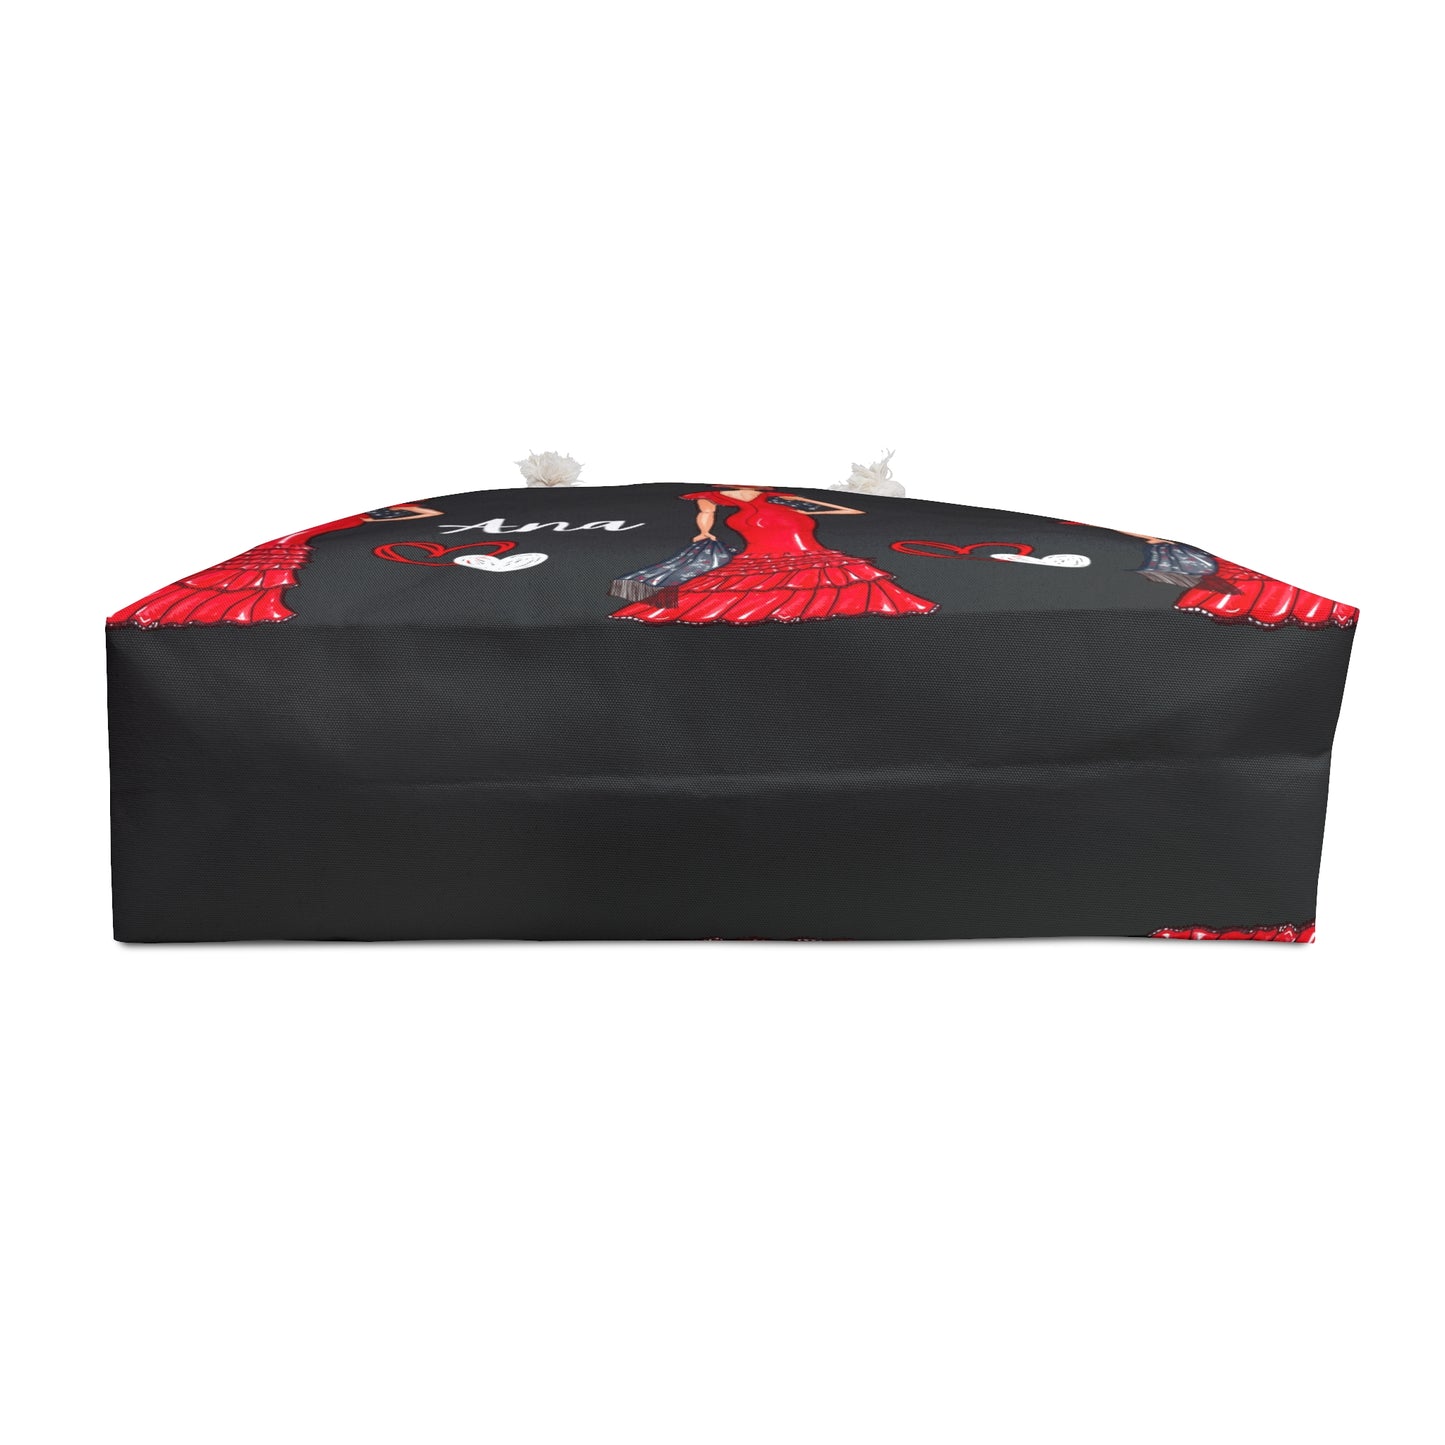 a black bag with a red and black design on it